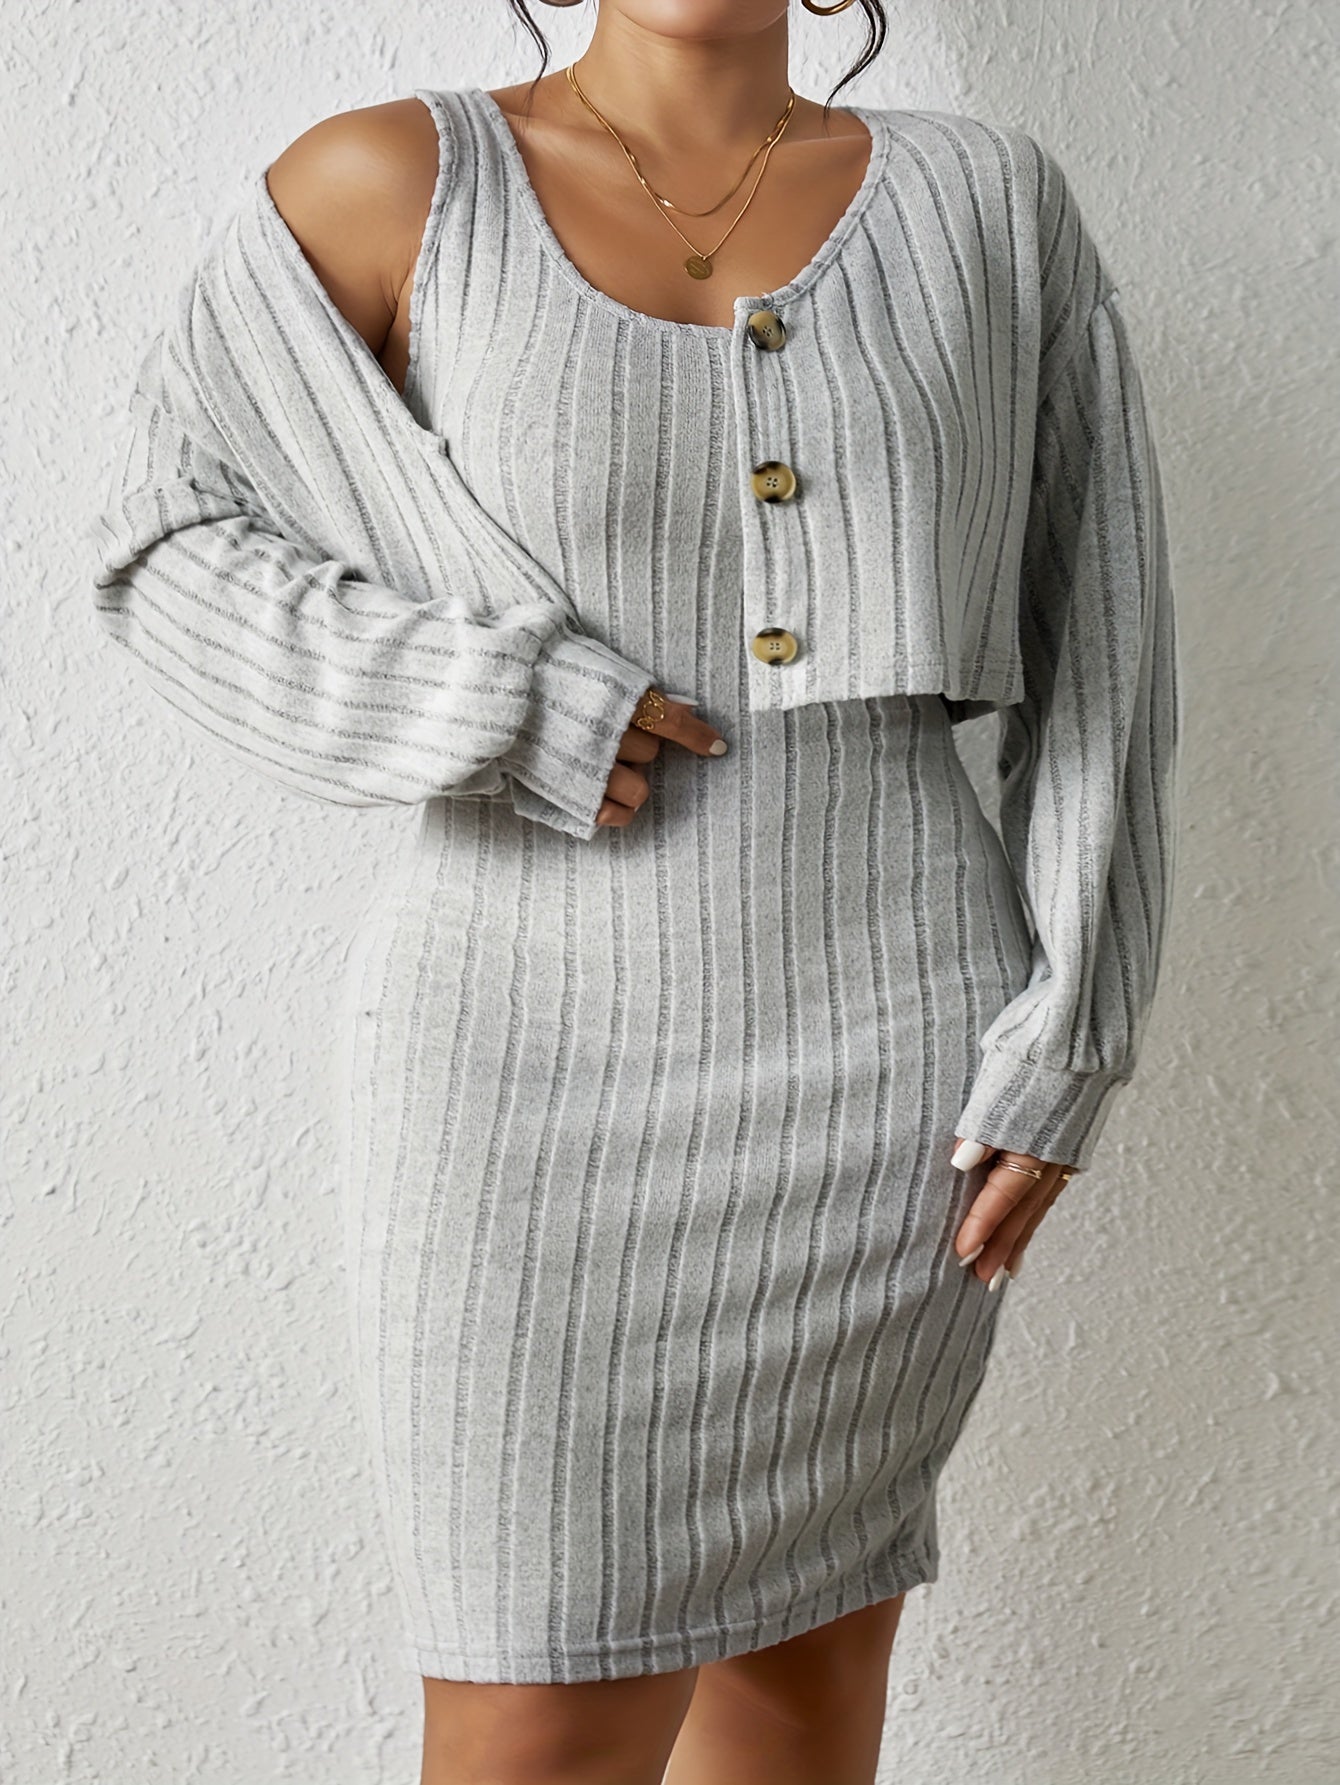 Plus Size Simple Outfits Set, Women's Plus Solid Ribbed Knit Round Neck Slim Fit Tank Dress & Long Sleeve Button Decor Knit Top Outfits Two Piece Set